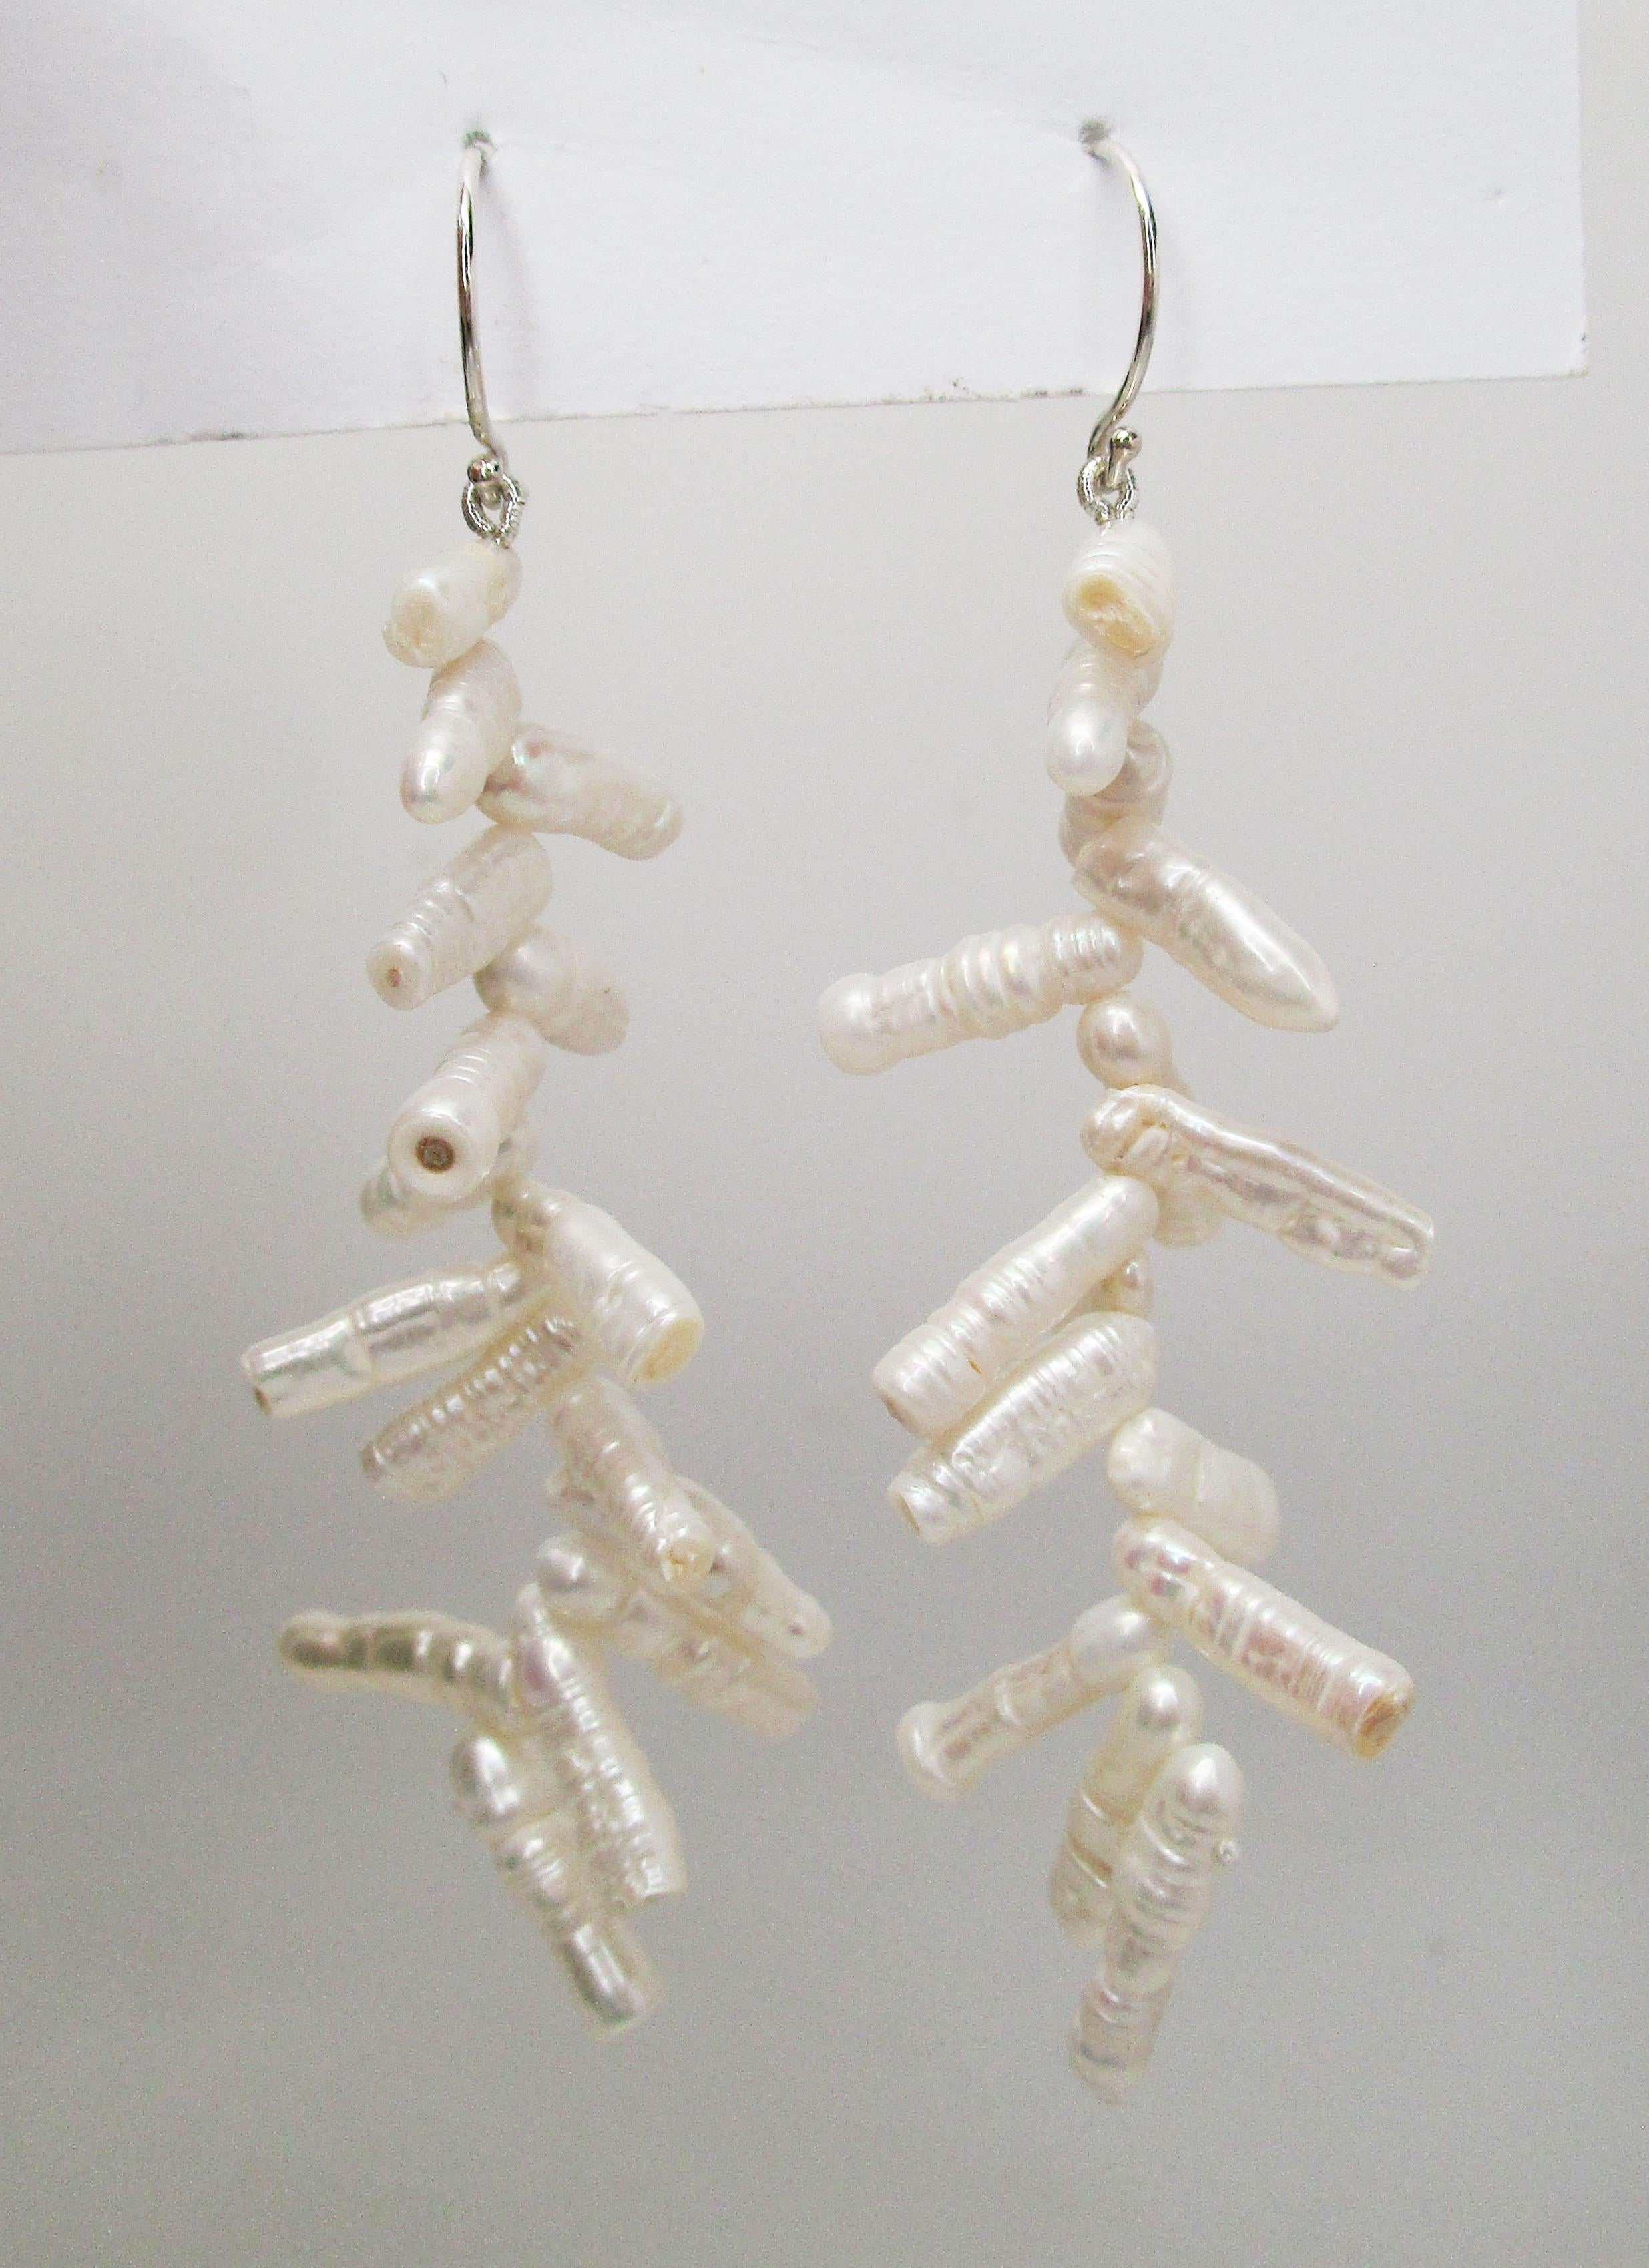 This remarkable pair of dangle earrings features sterling silver shepherd’s hook wires and a stunning array of brilliant white branch pearls. The pearls have an incredible luster and a stunning white color! These unique earrings allow for a lovely